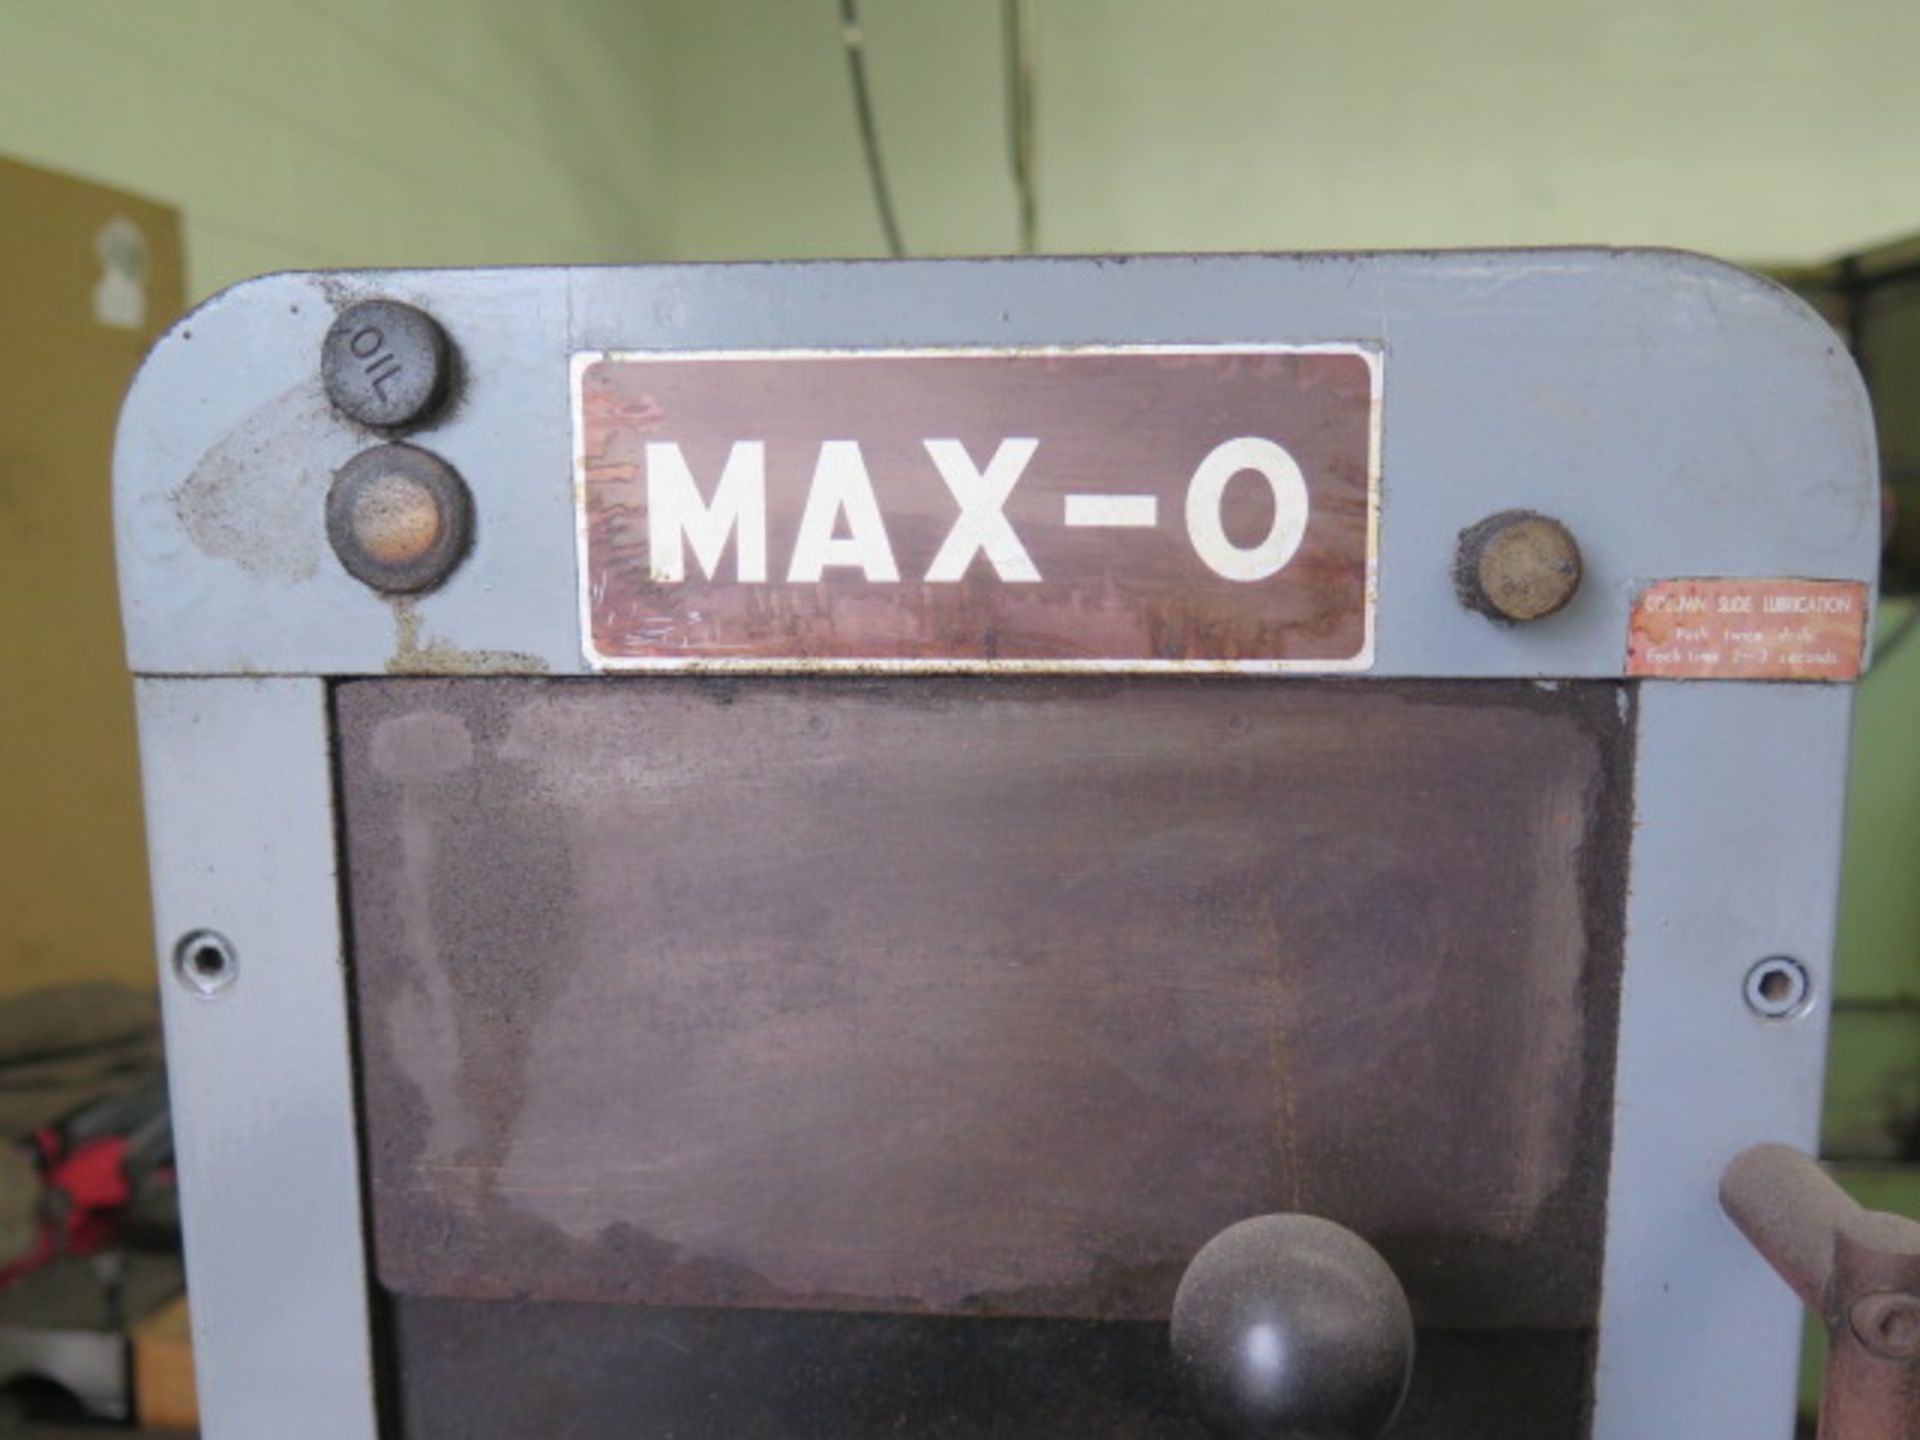 Max-O mdl. KGS-200 6” x 14” Surface Grinder s/n 780923-3 w/ Magnetic Chuck, Wheel Dresser, Coolant - Image 3 of 8